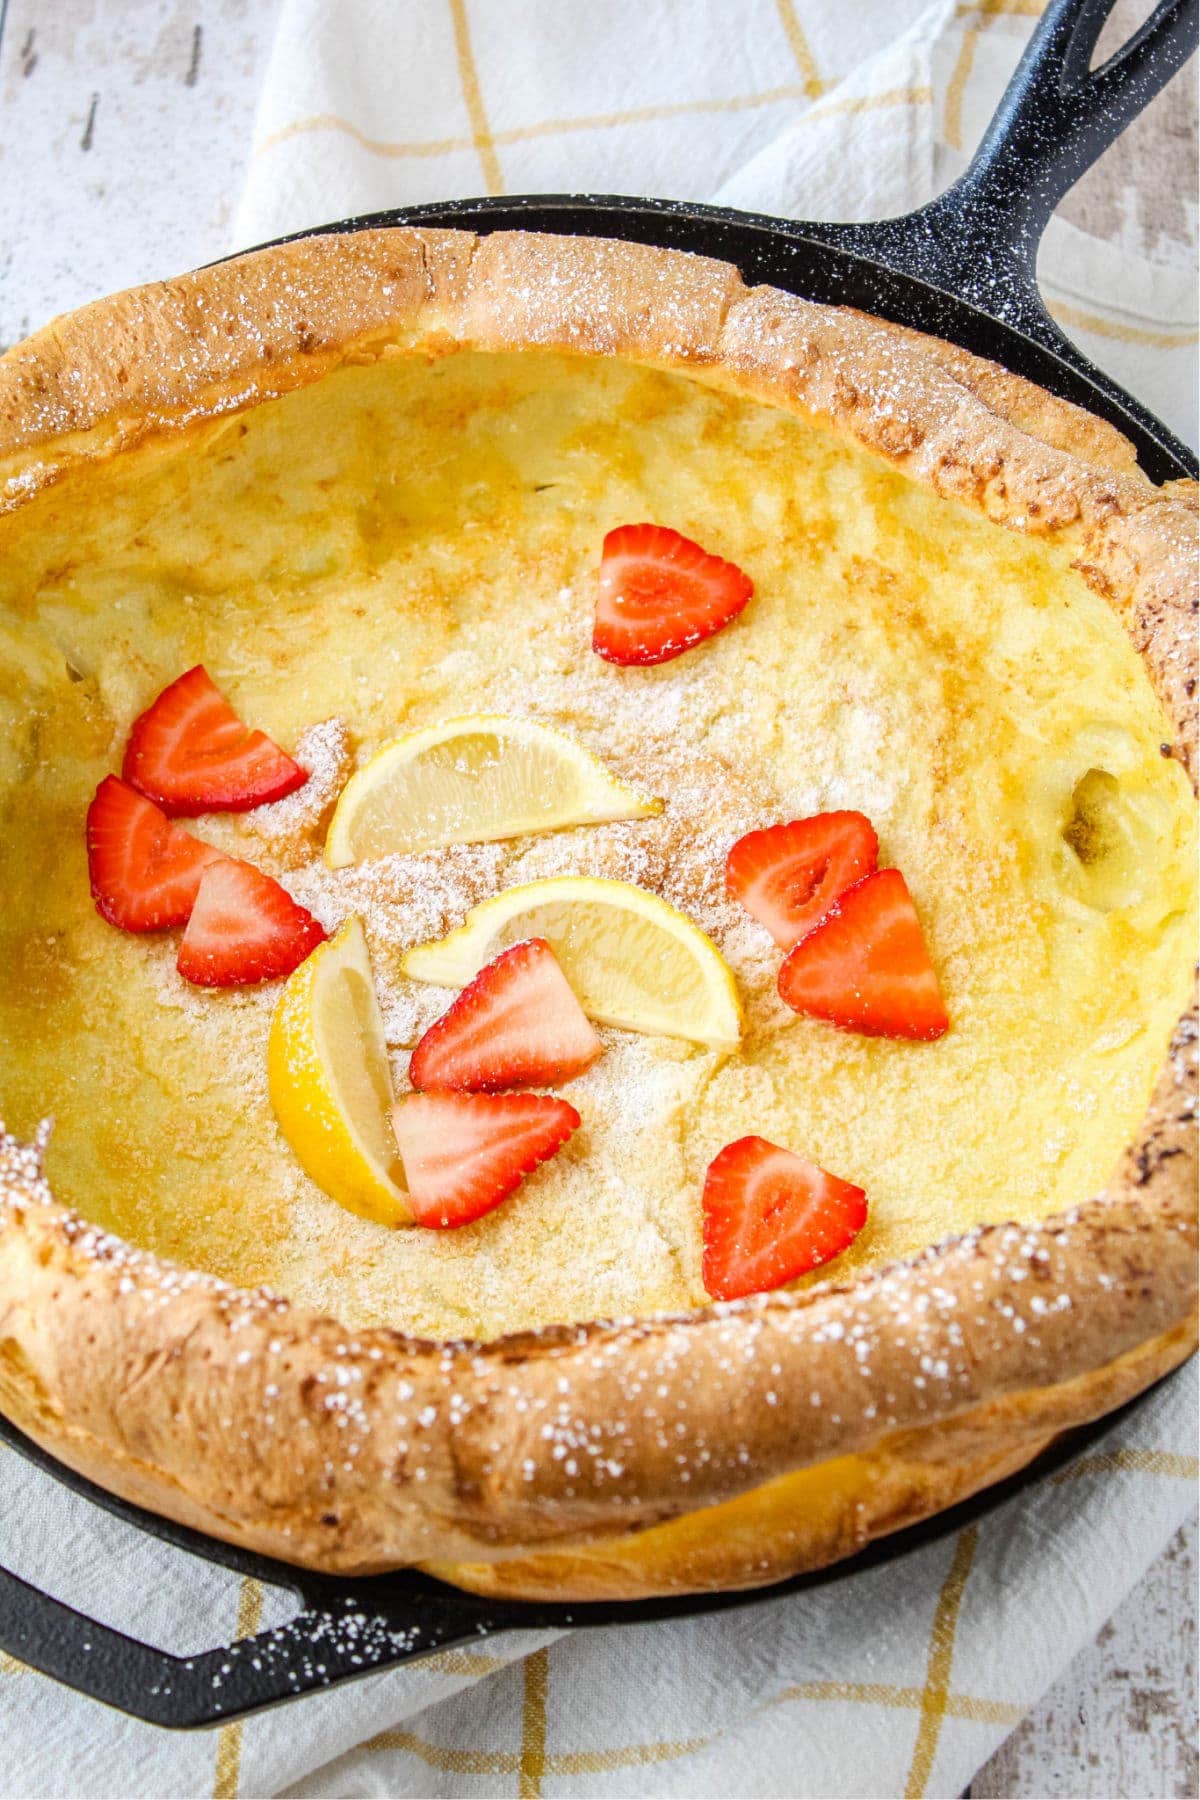 german pancake in a cast iron skillet after cooking, topped with powdered sugar, strawberries, and lemon